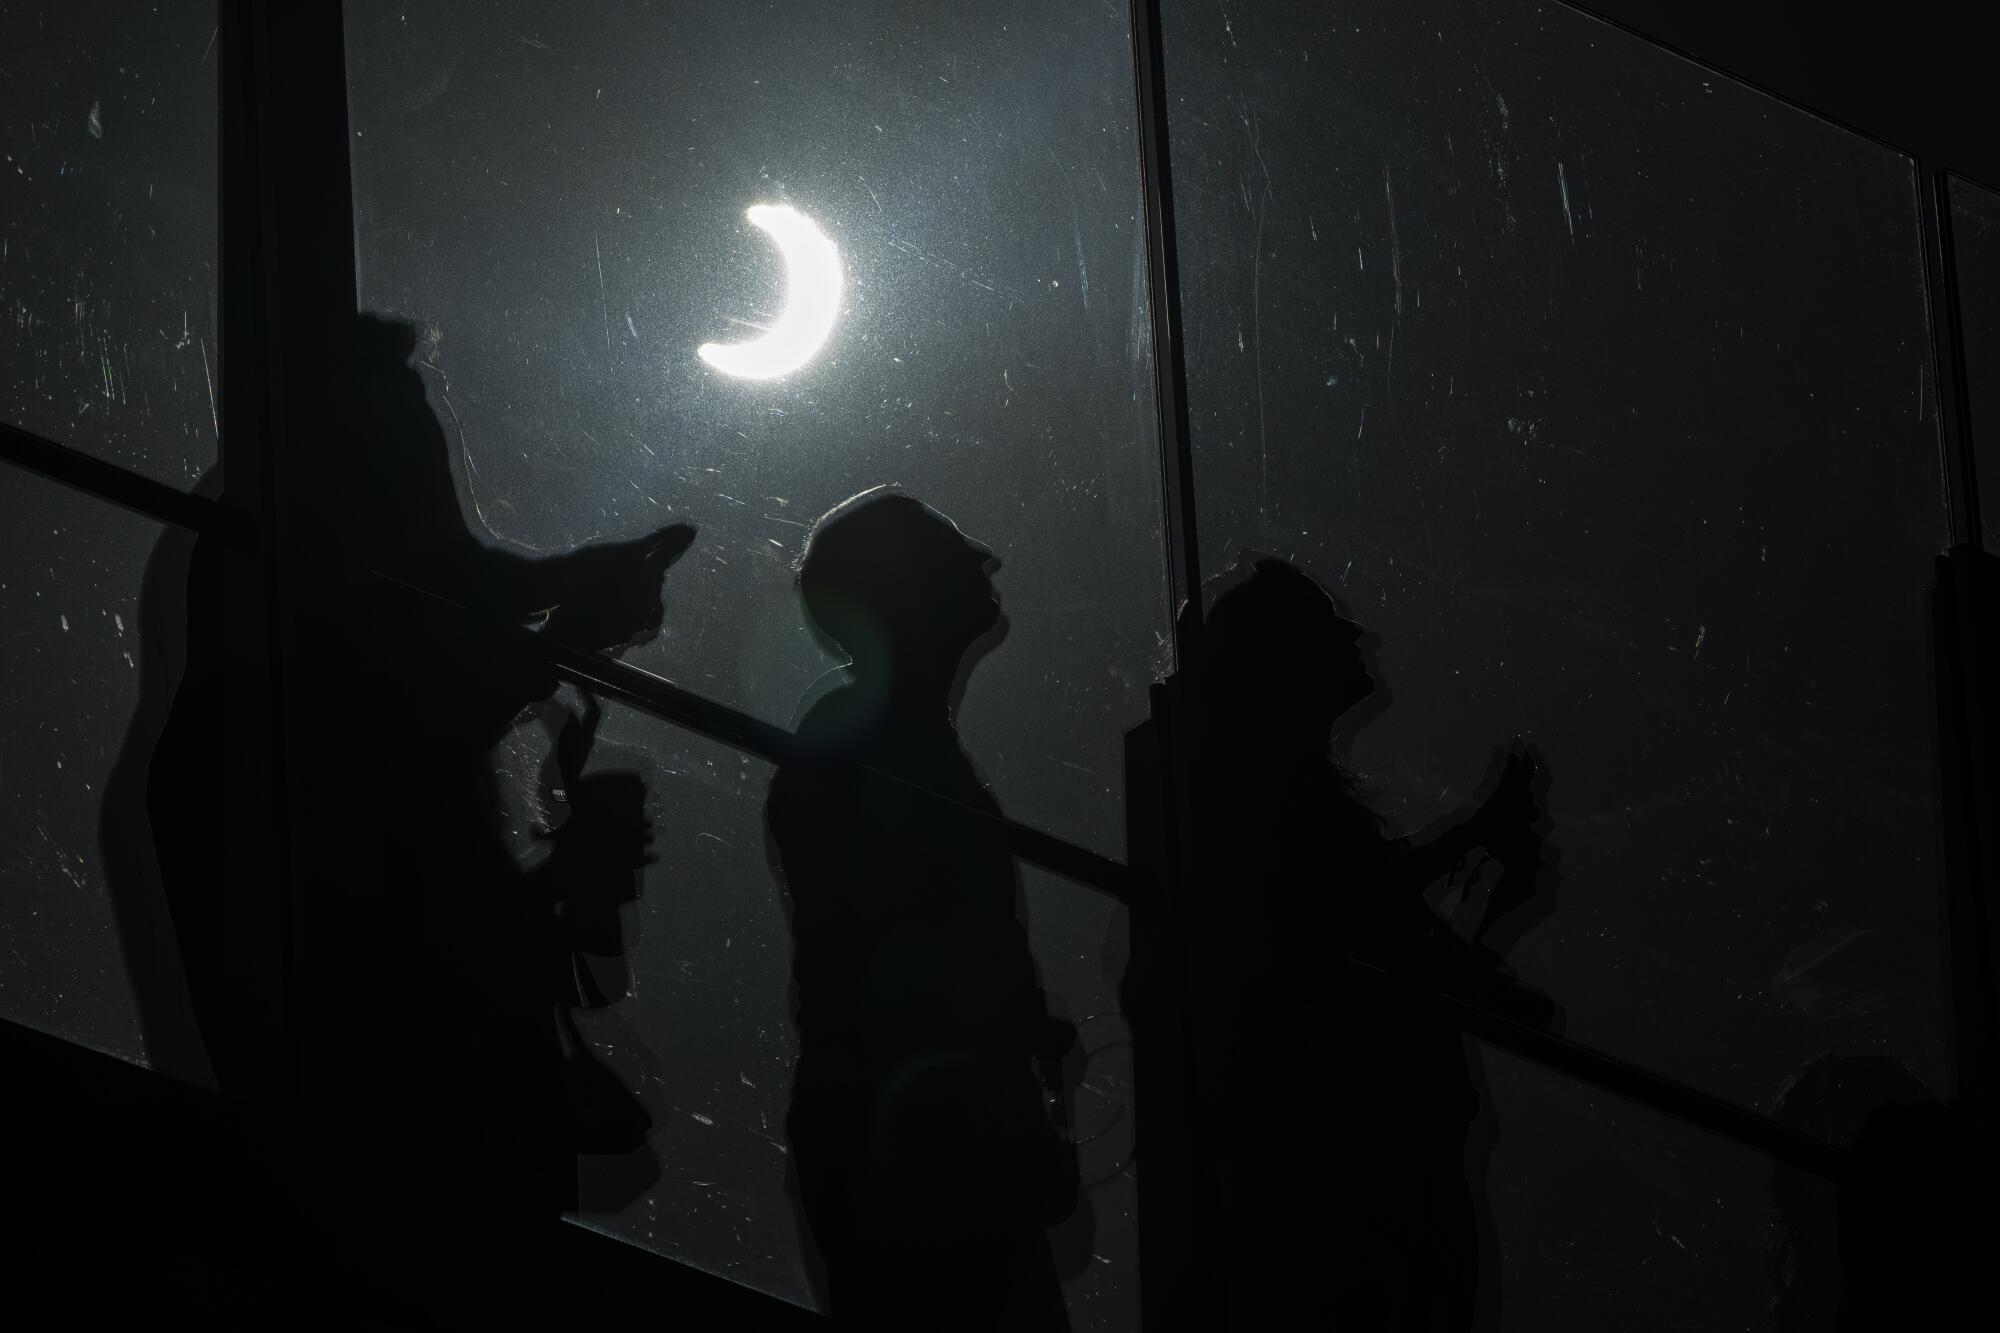 People watch a rare "ring of fire" solar eclipse in the dark.